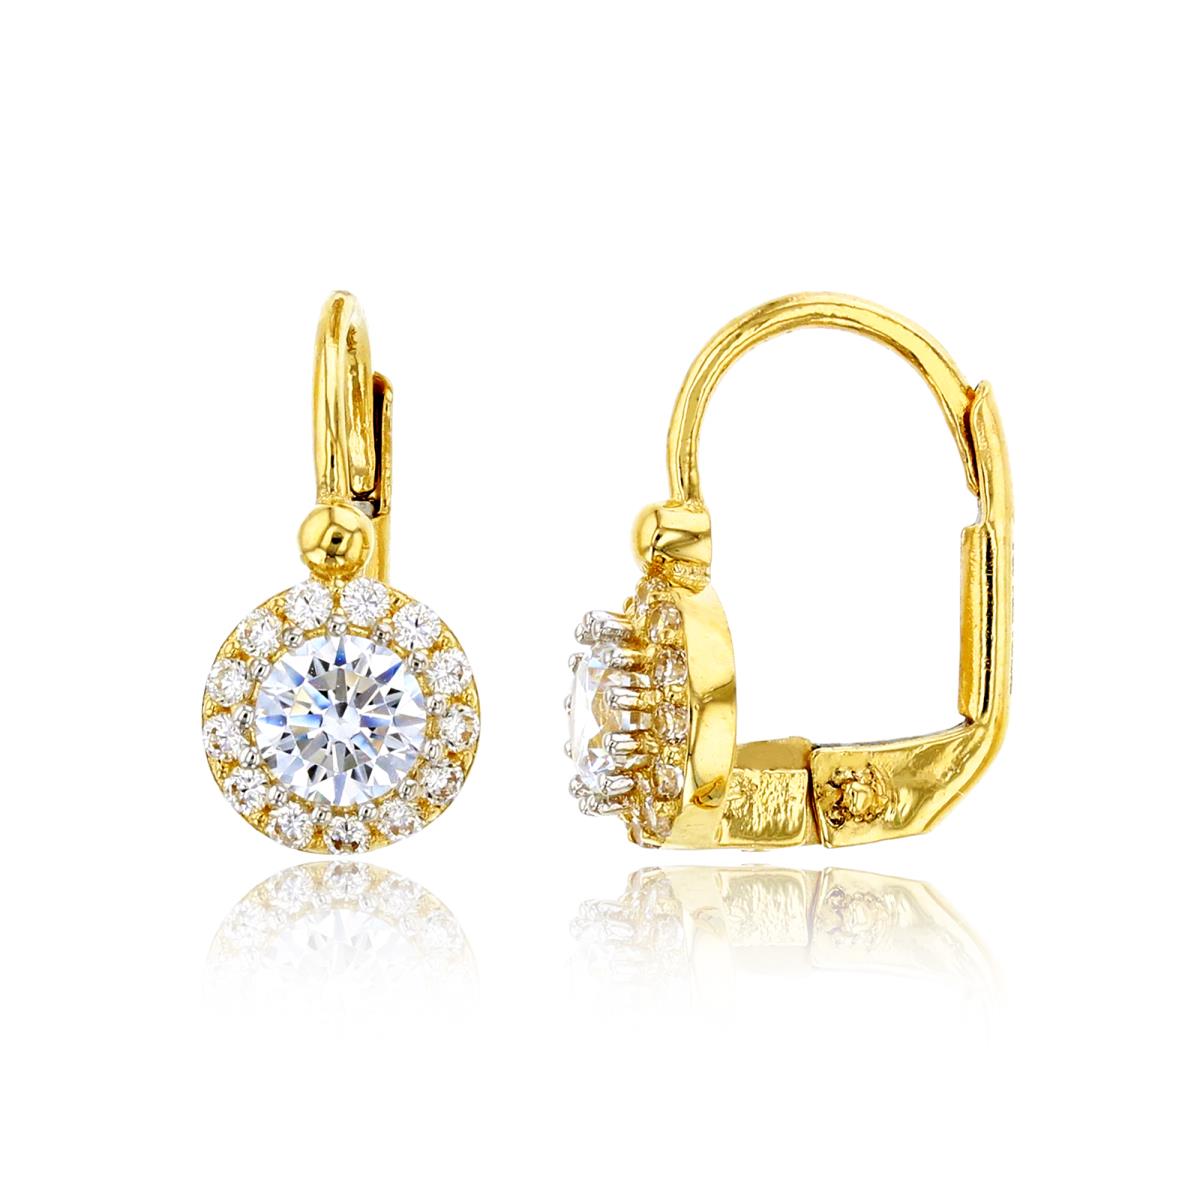 10K Yellow Gold 5mm Round Cut Halo Leverback Earring